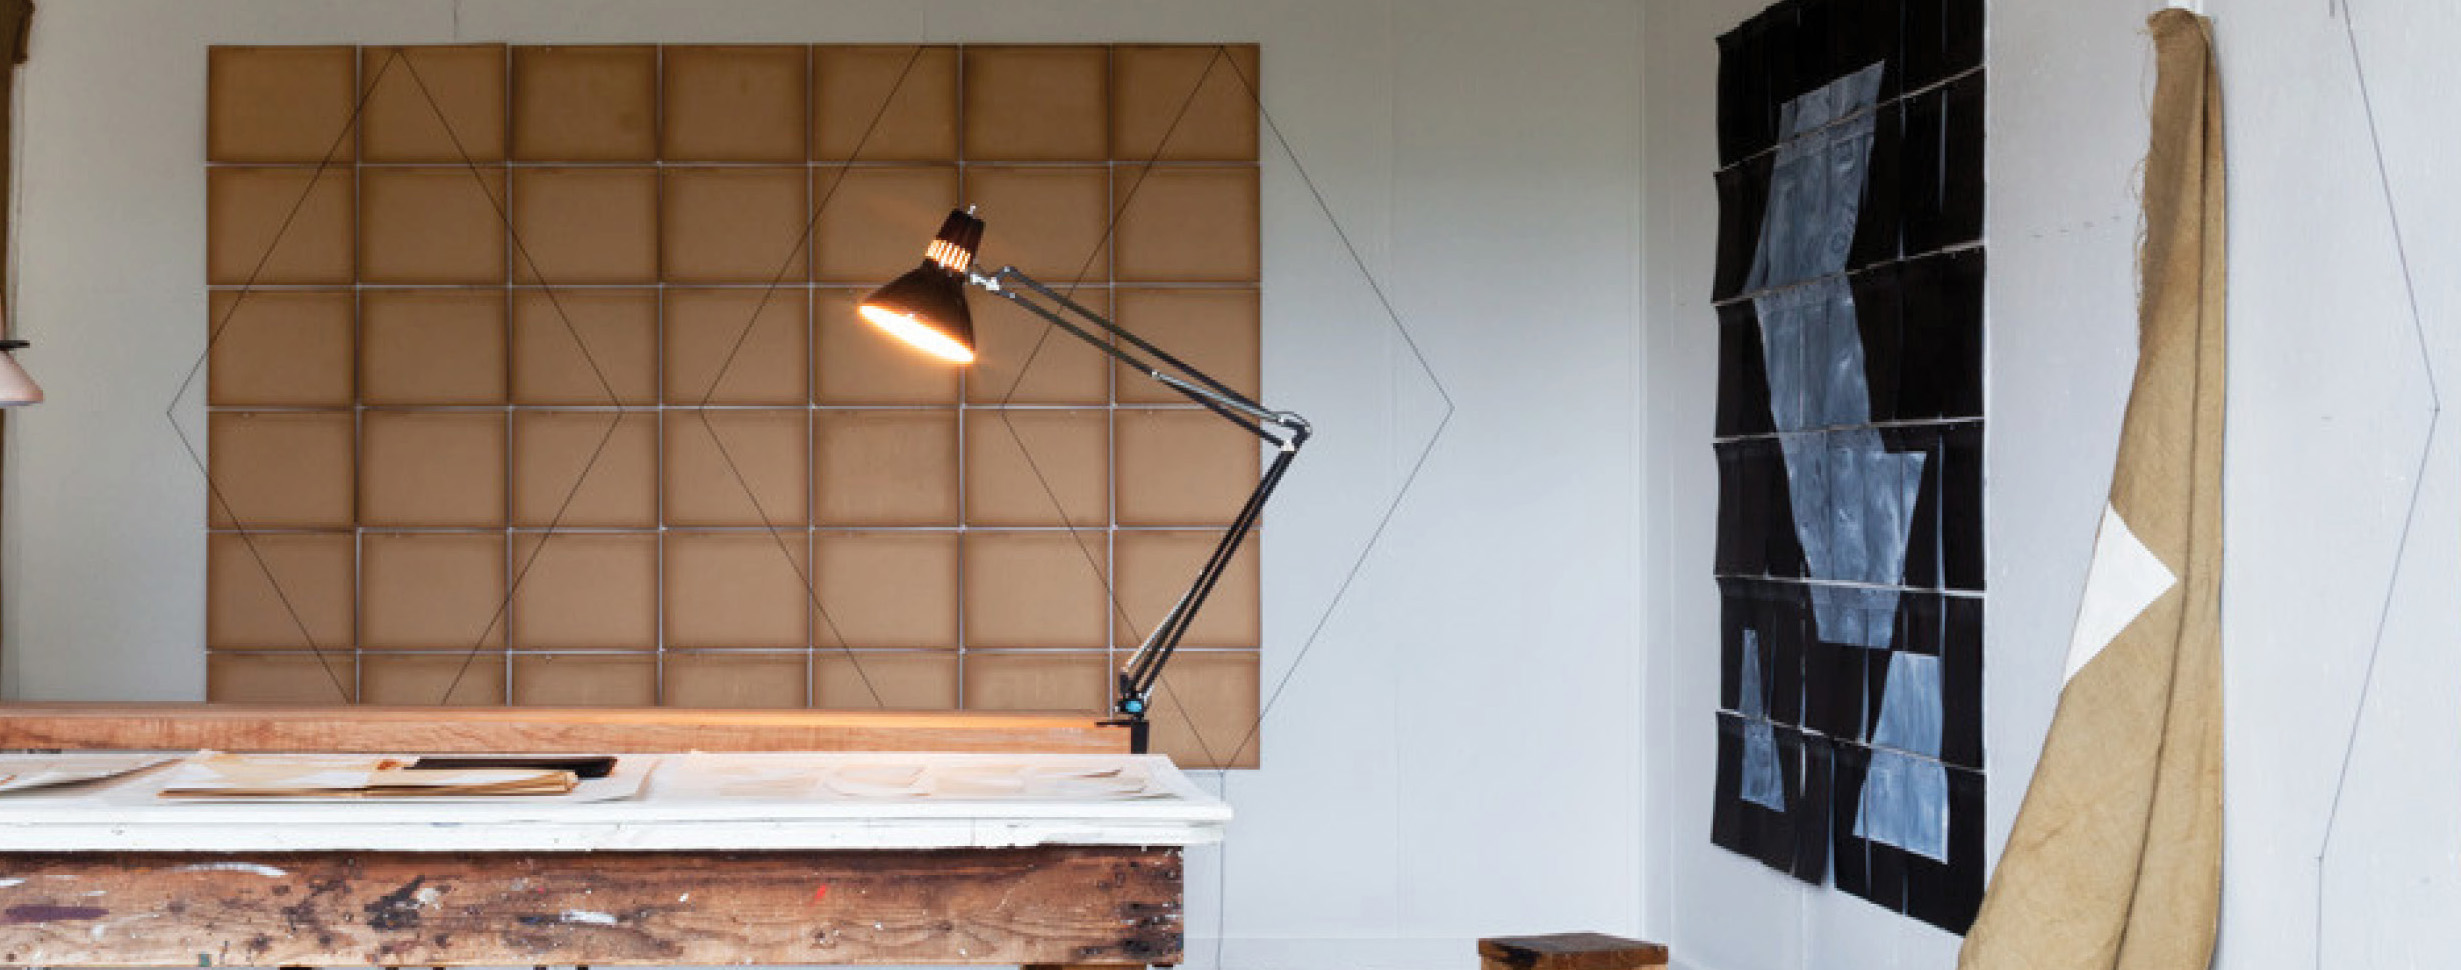 studio work table with clamped light; tan grid behind with thin lined diamond shapes laid on top